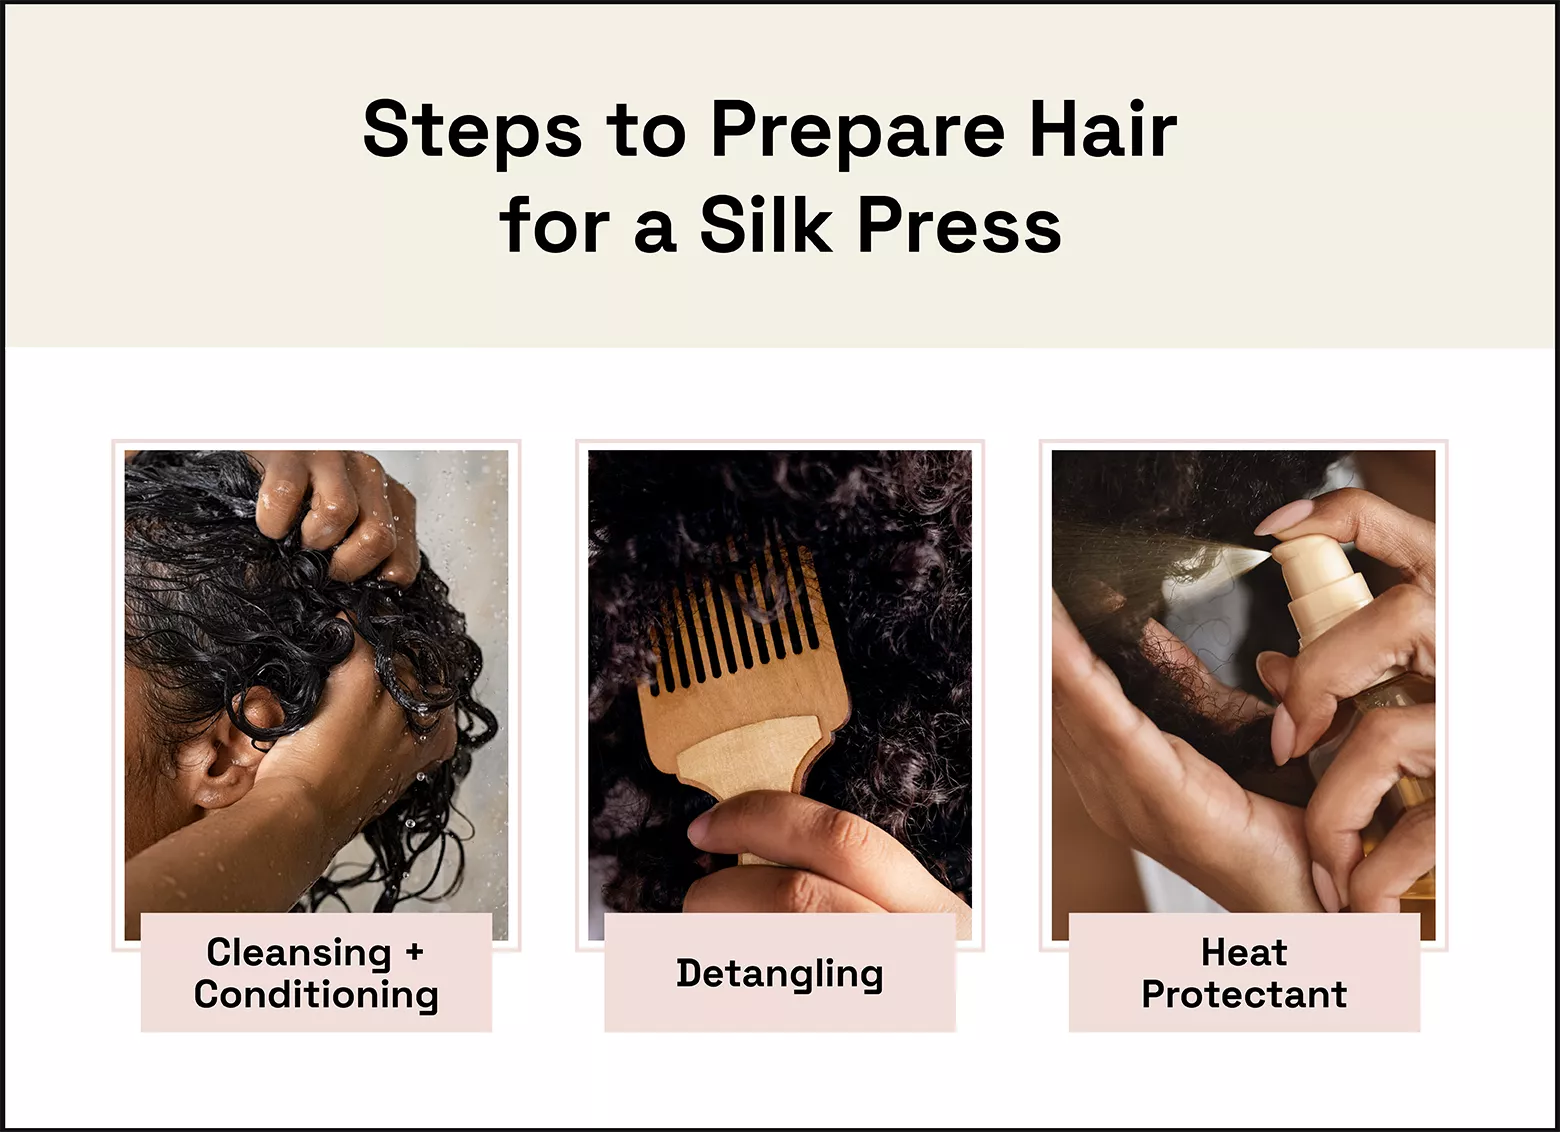 close-up photos showing steps to prepare hair for a silk press: cleansing and conditioning, detangling, and heat protectant